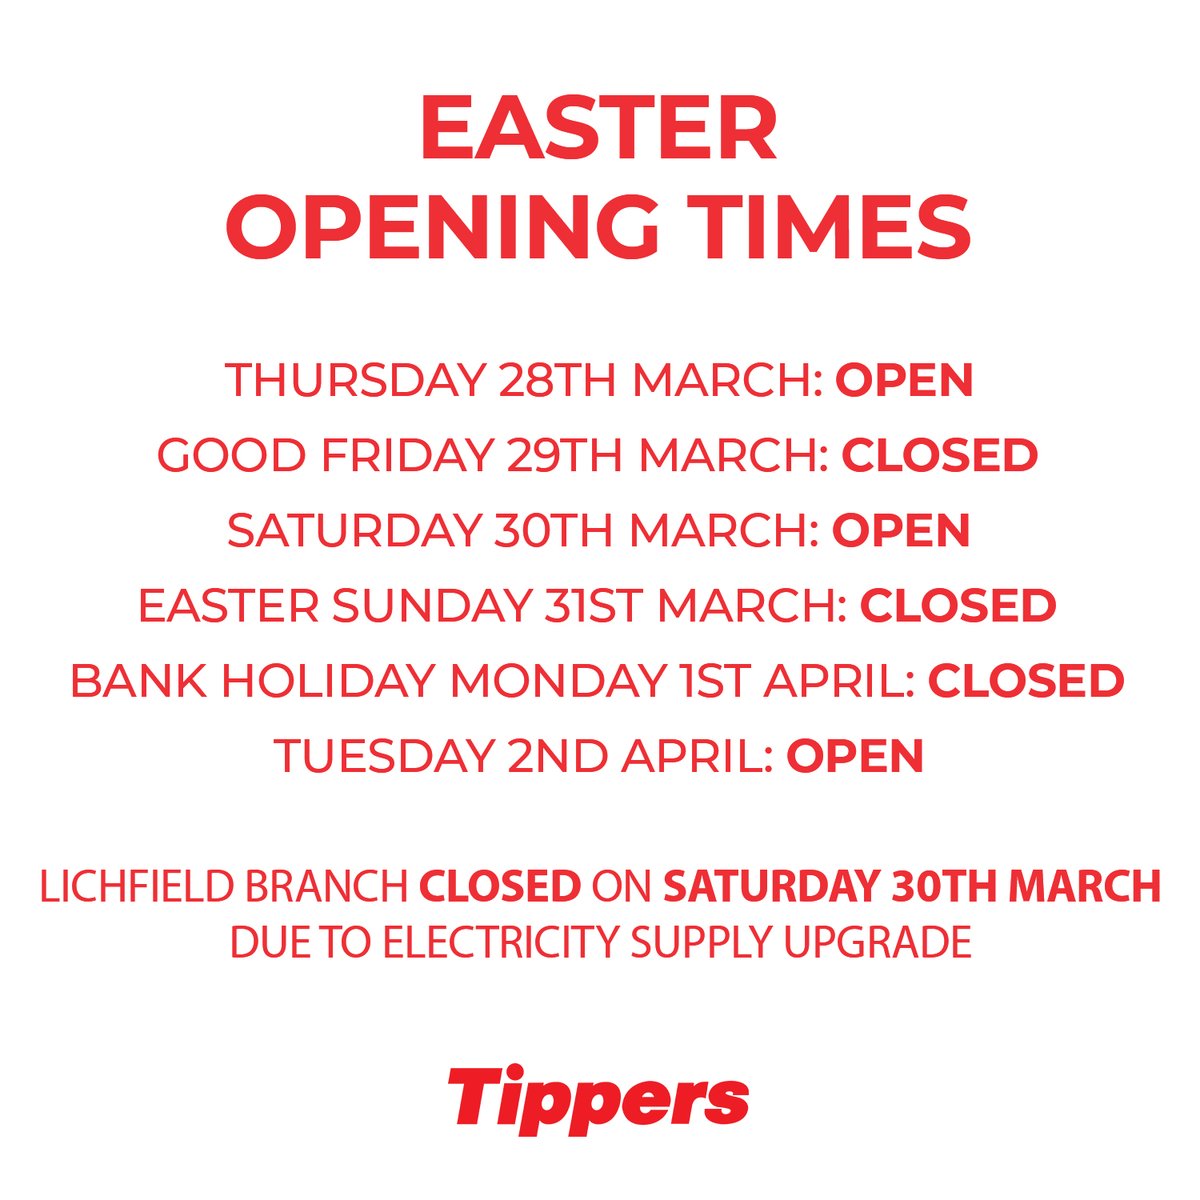 Easter Opening Times 🐰 There's not long to go until the Easter Bank Holiday weekend! Check out our opening times here! Please note, our Lichfield branch will be closed on Saturday 30th March due to an electricity supply upgrade. All other branches will be open on this day.